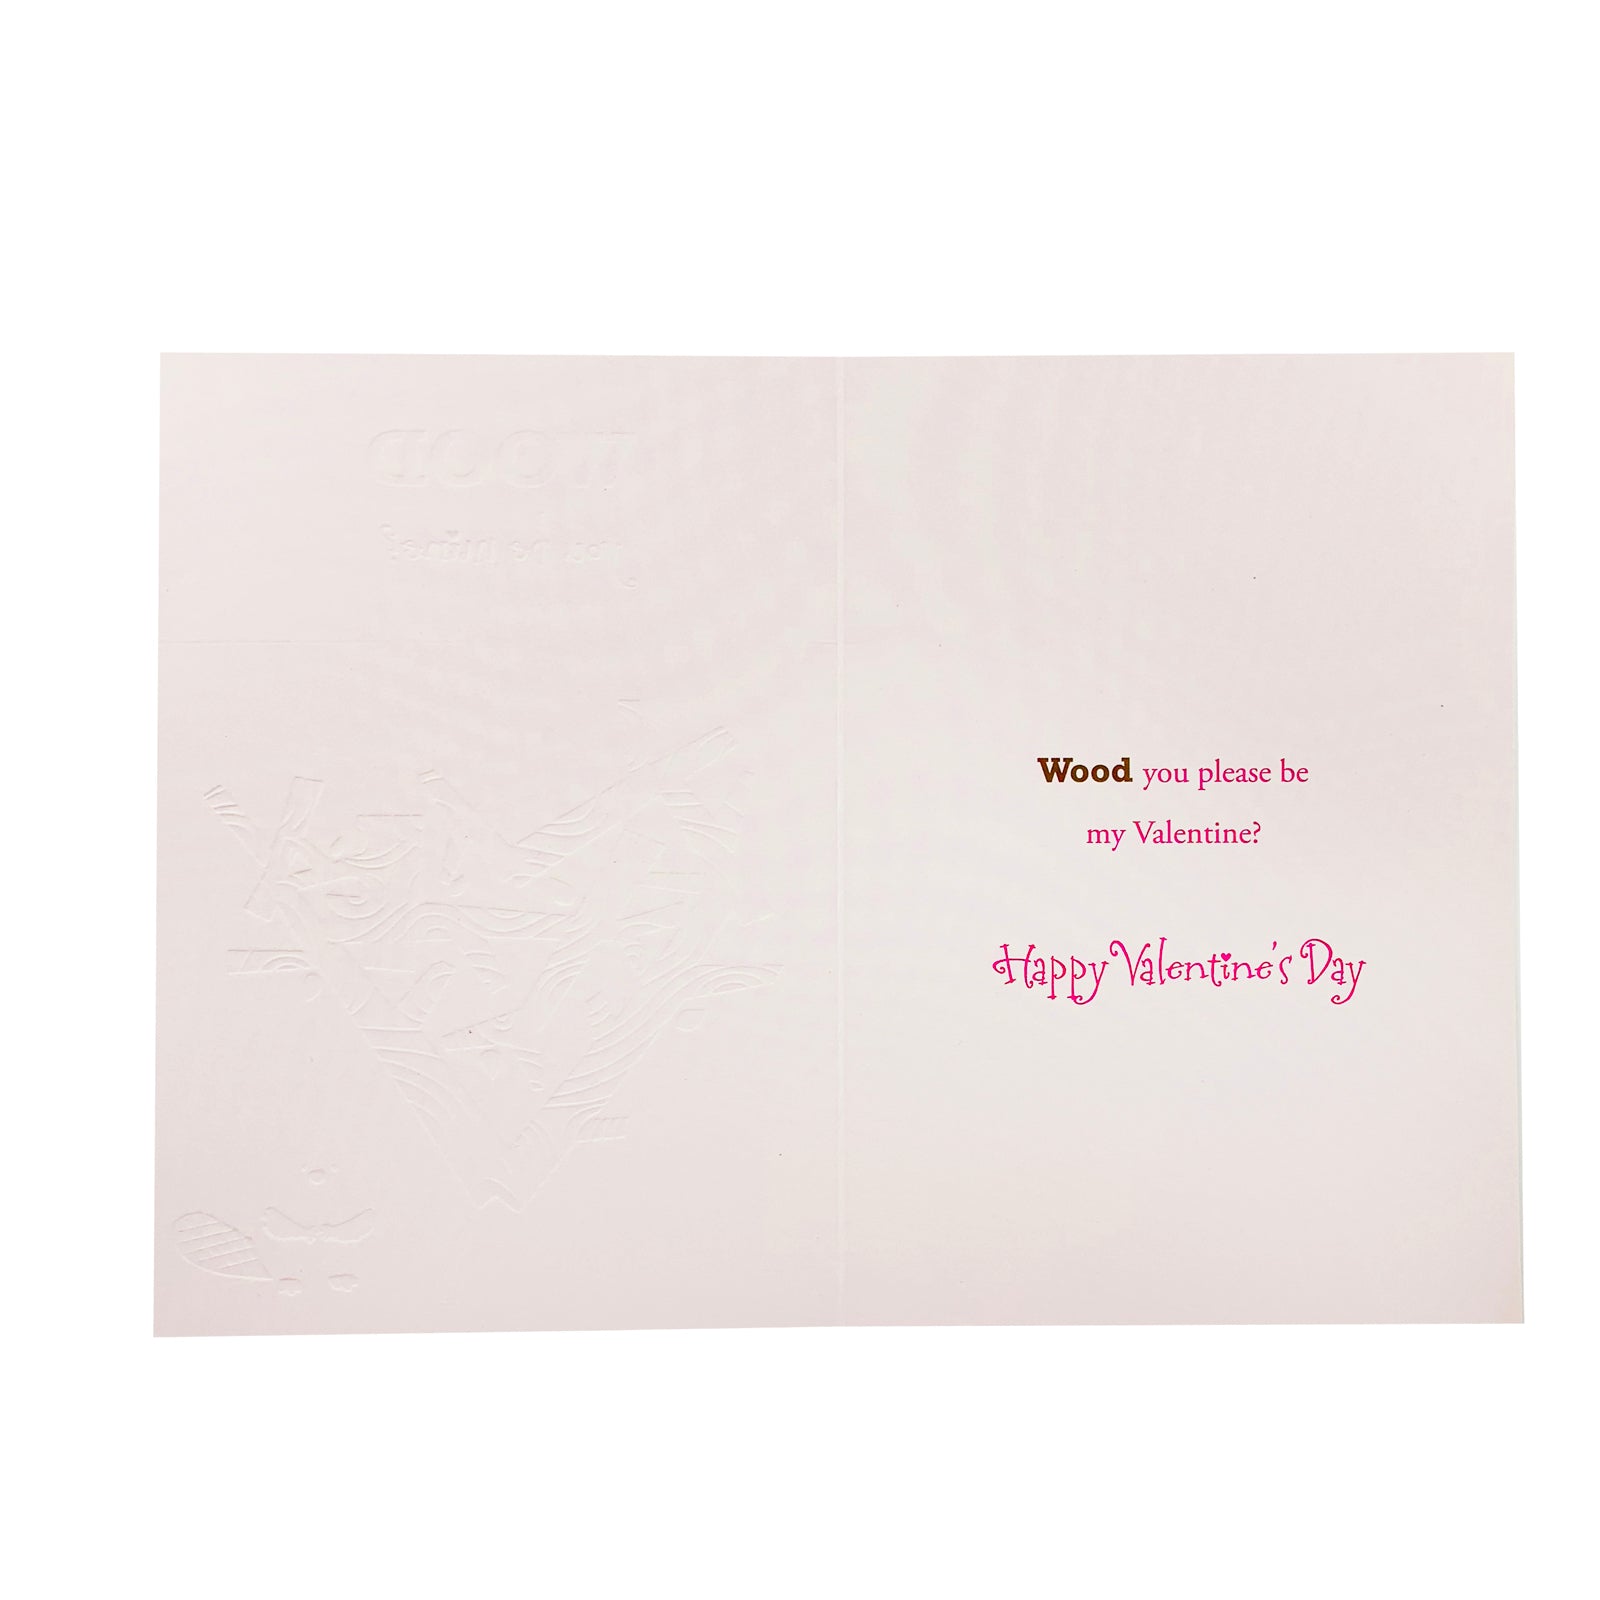 Designer Greetings Valentine's Day Card - Wood You Be Mine